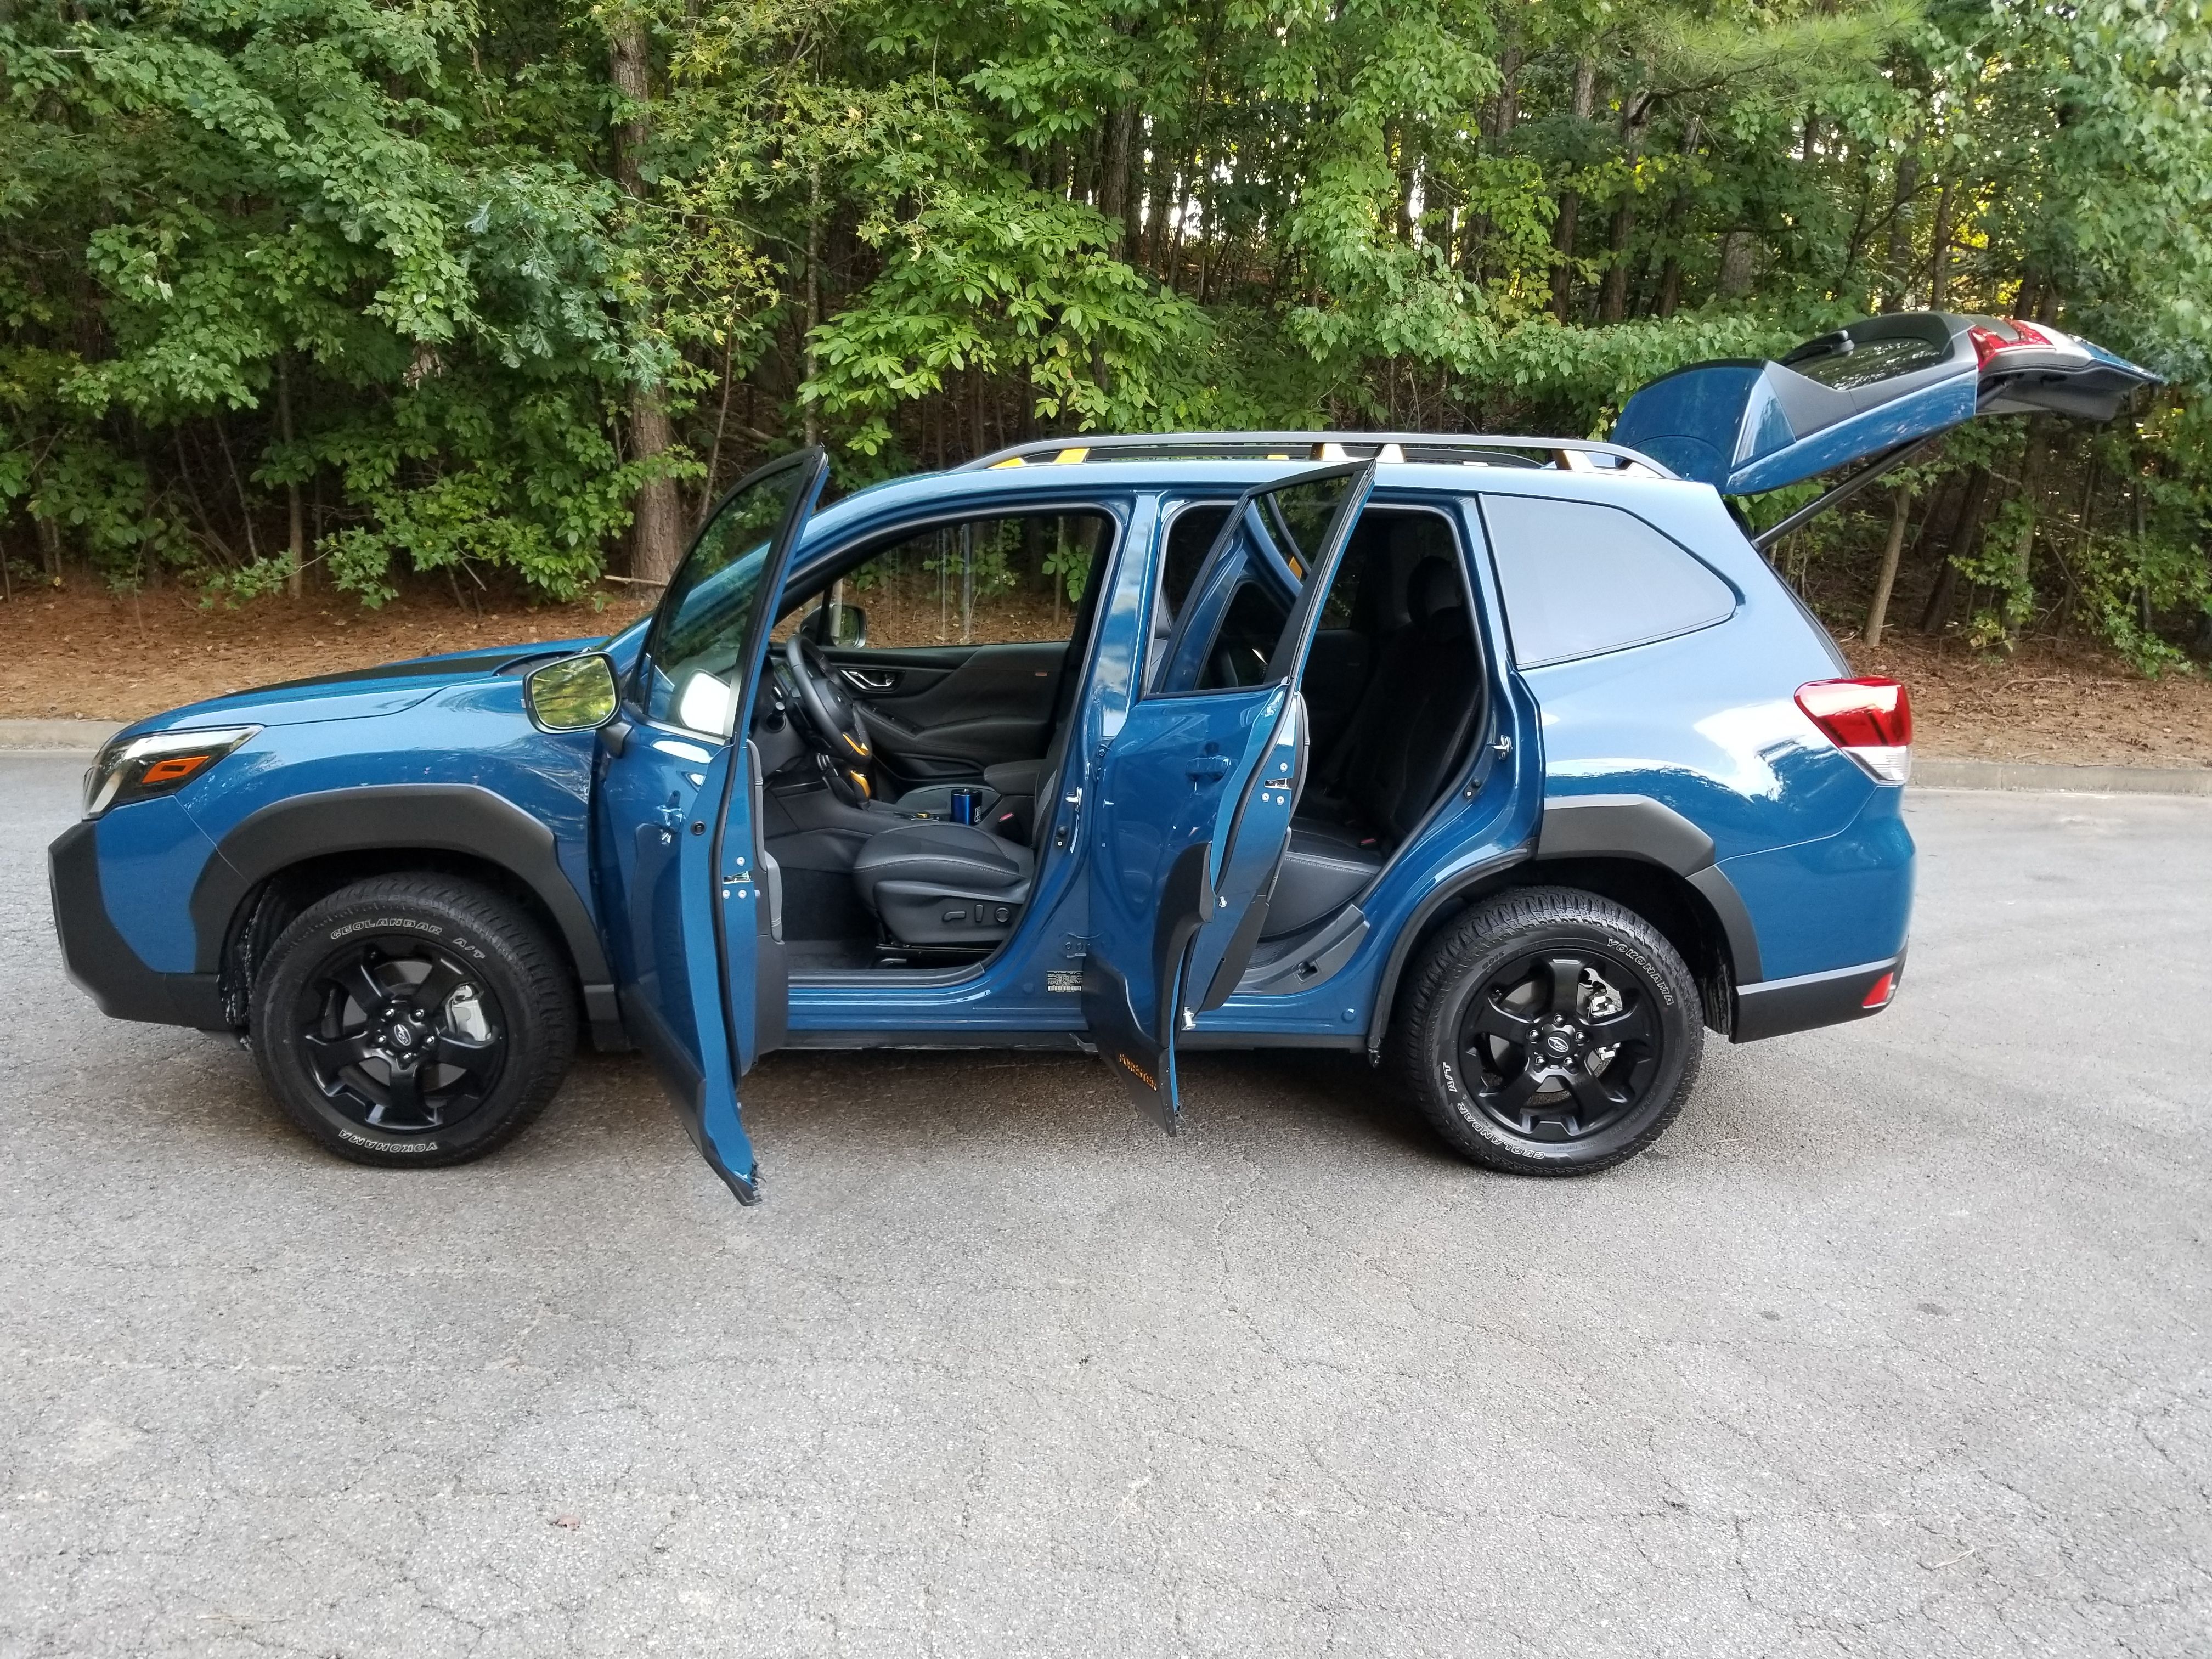 2022 Subaru Forester Wilderness - So Much More Than A Grocery Getter